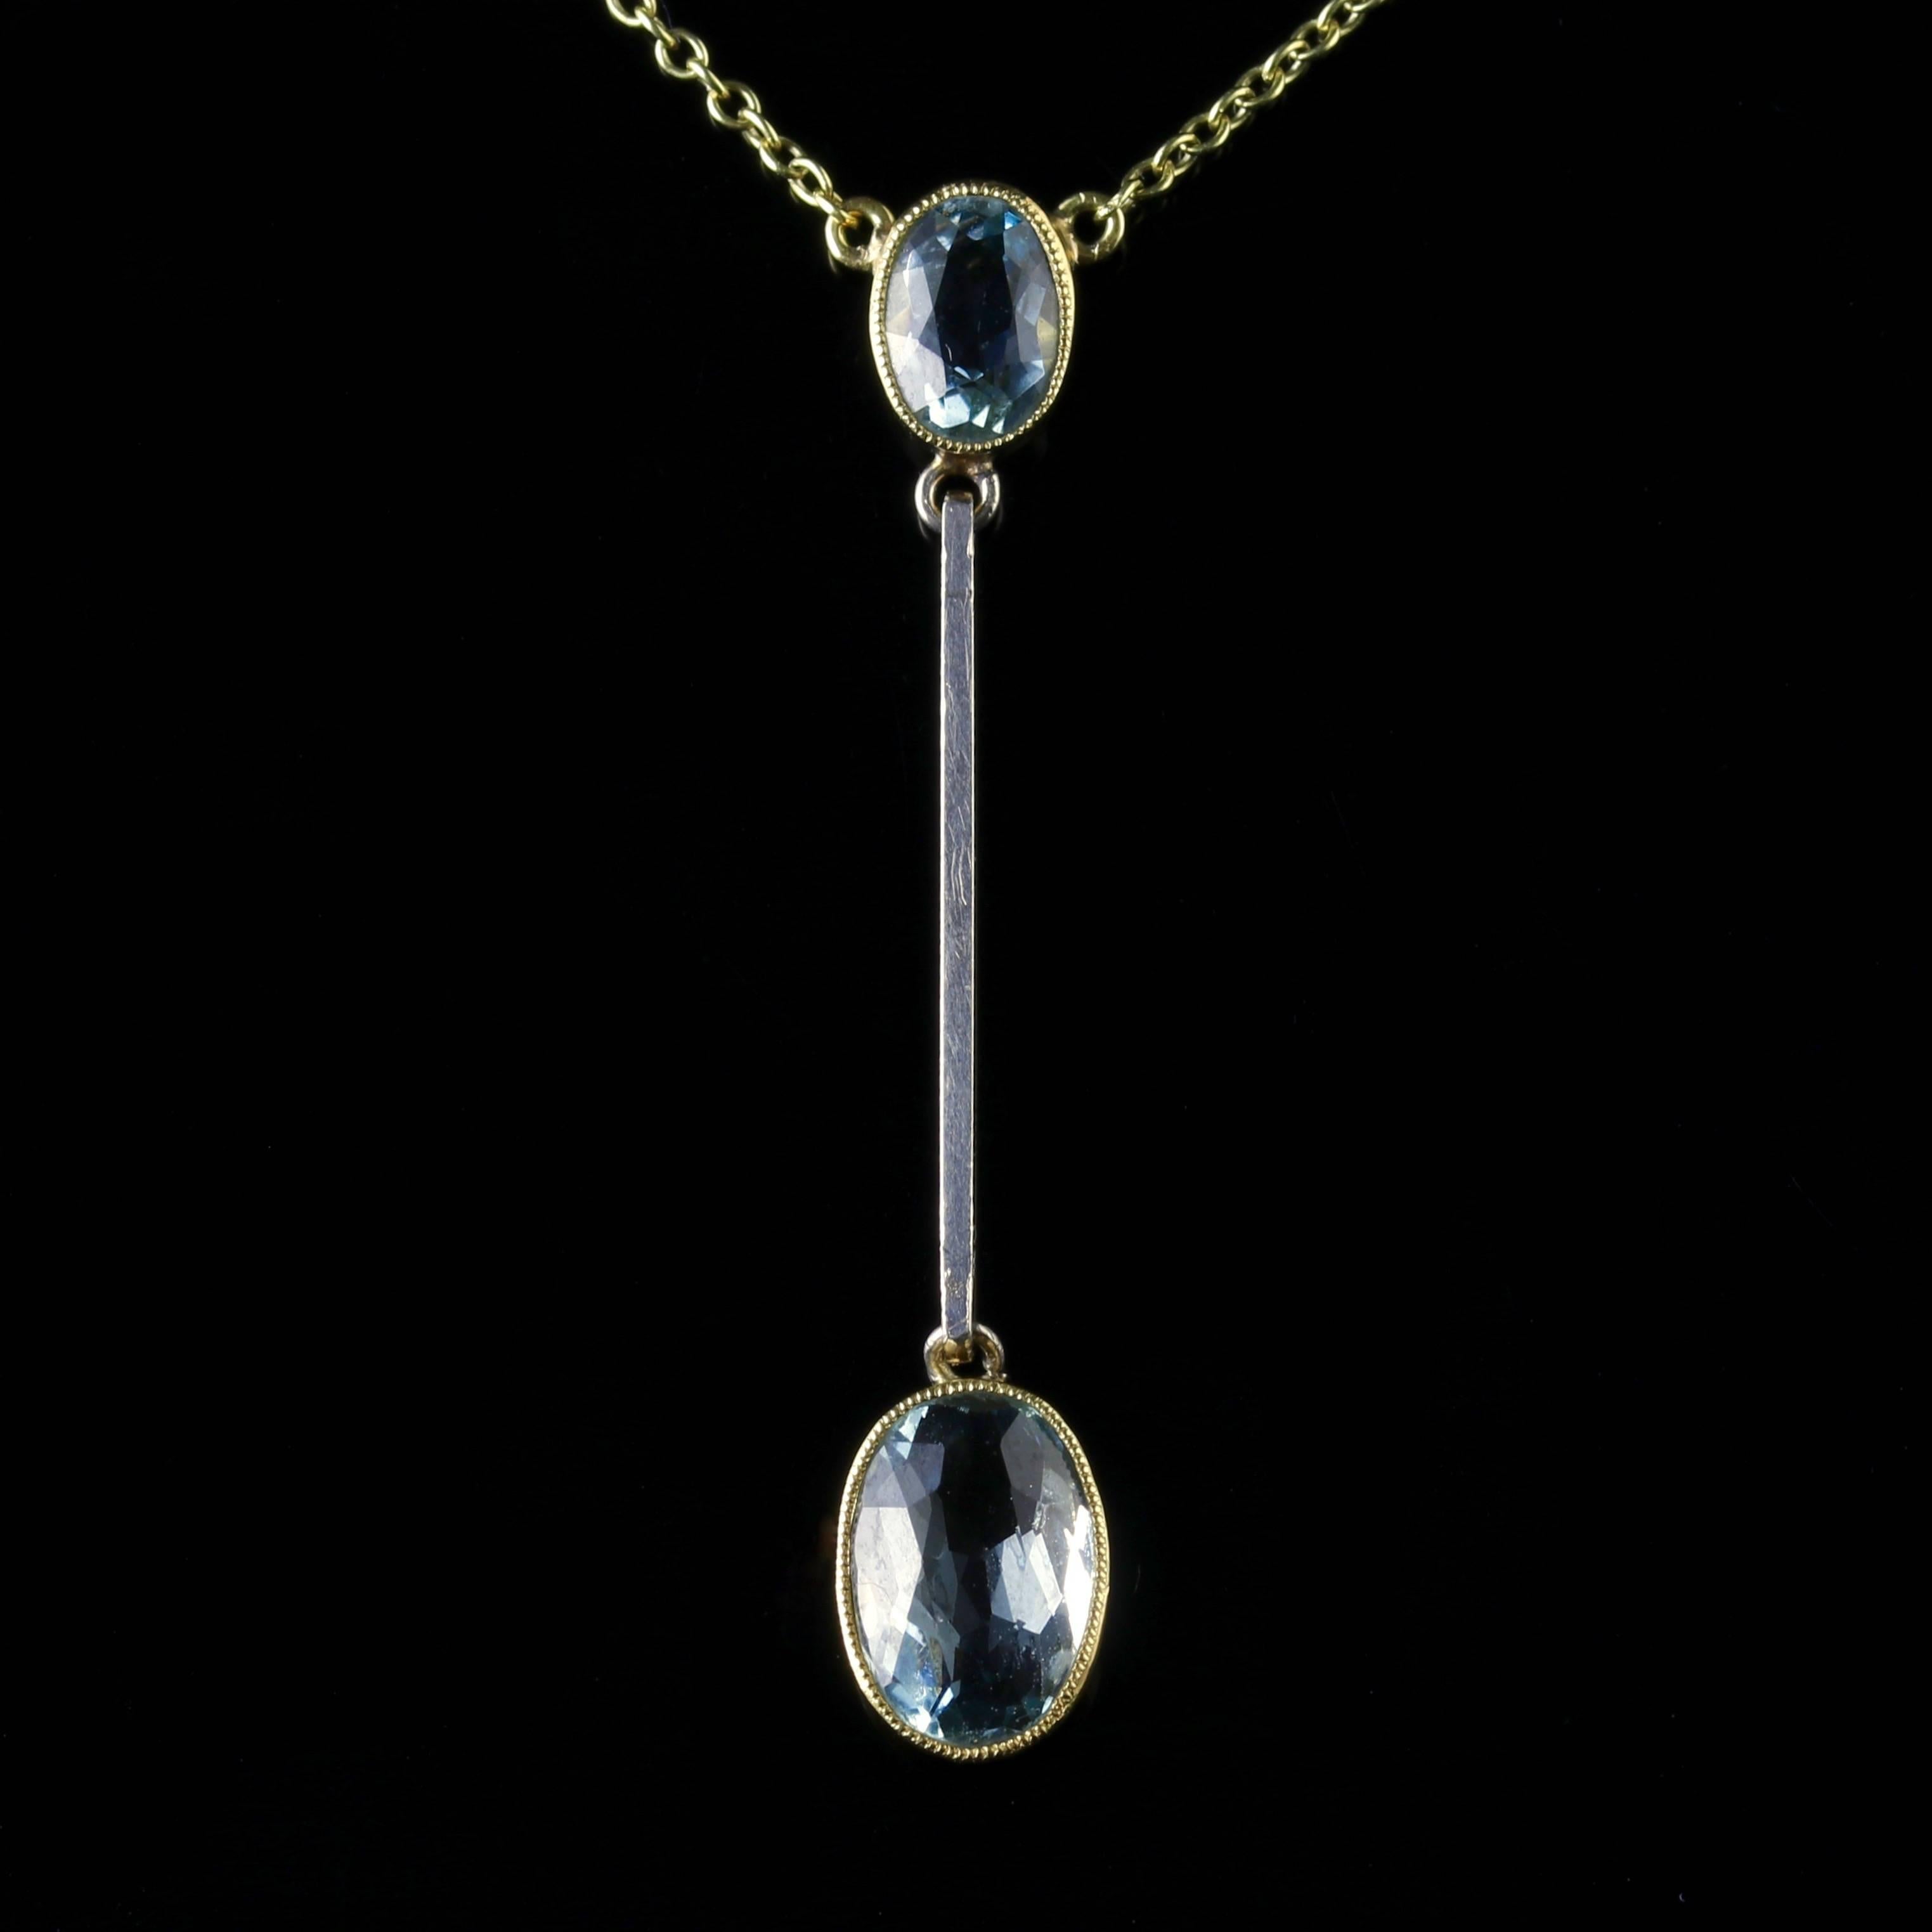 This beautiful 15ct Yellow Gold Aquamarine double drop pendant on a chain is stunning.

Genuine Edwardian, Circa 1910.

The bottom Aquamarine is just over 2.50ct with a smaller Aqua at the top.

The sky blue of the Aquamarine makes it one of the